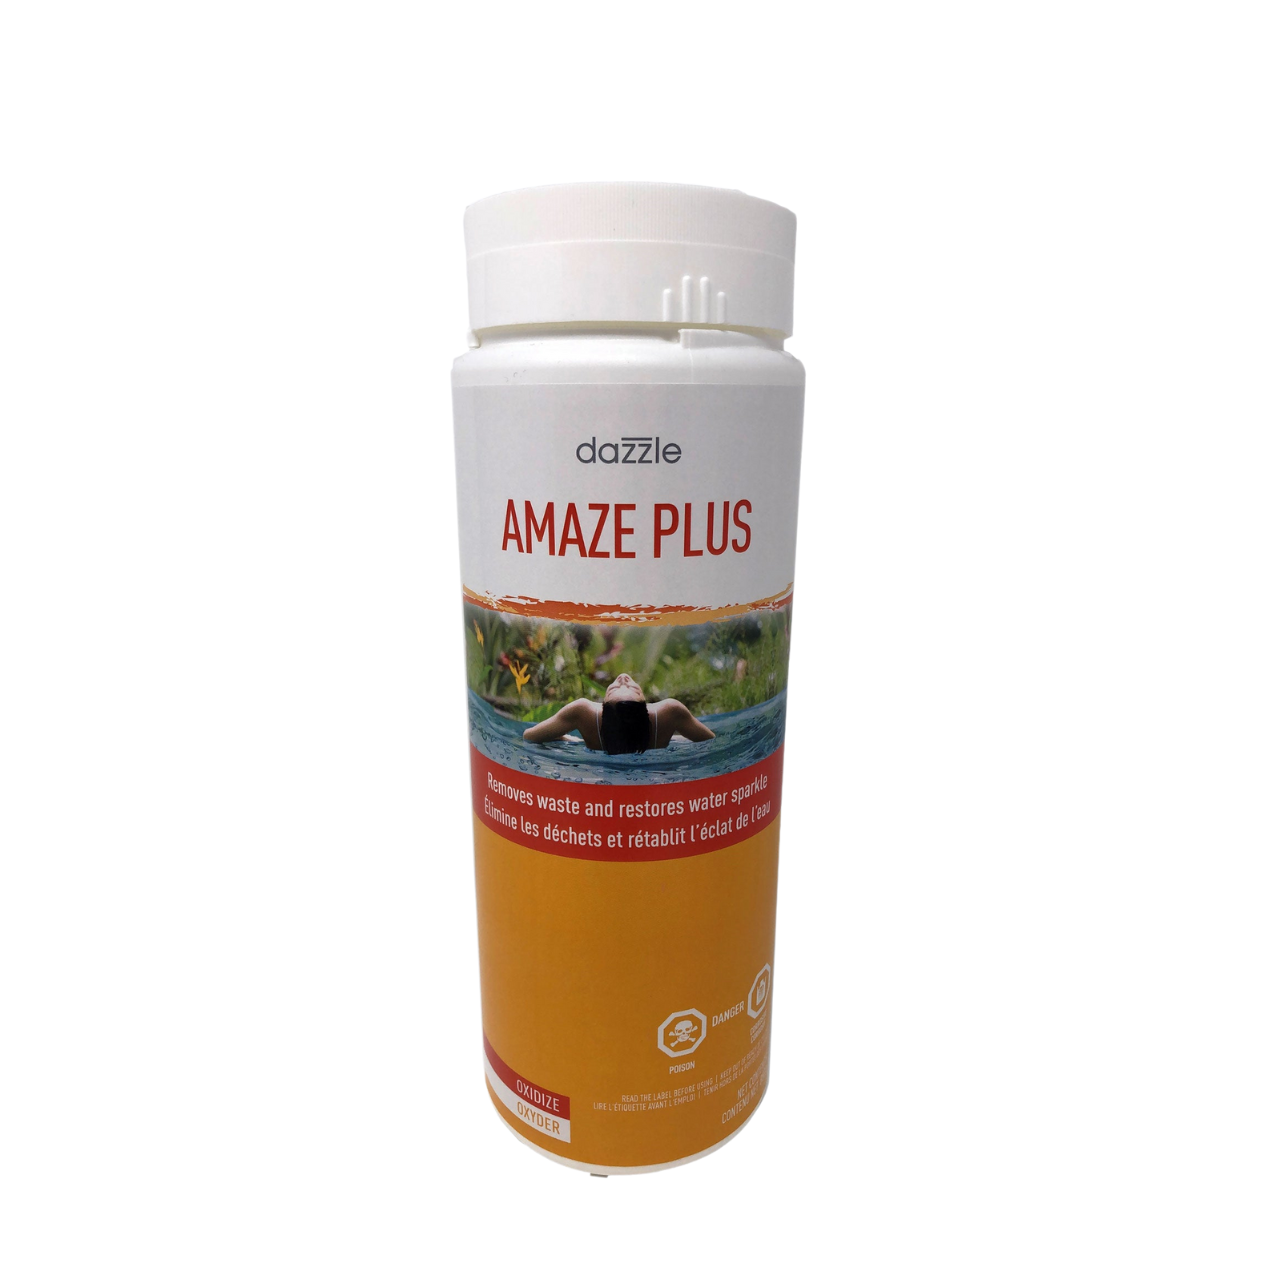 Dazzle™ Amaze Plus - Removes waste and restores water sparkle